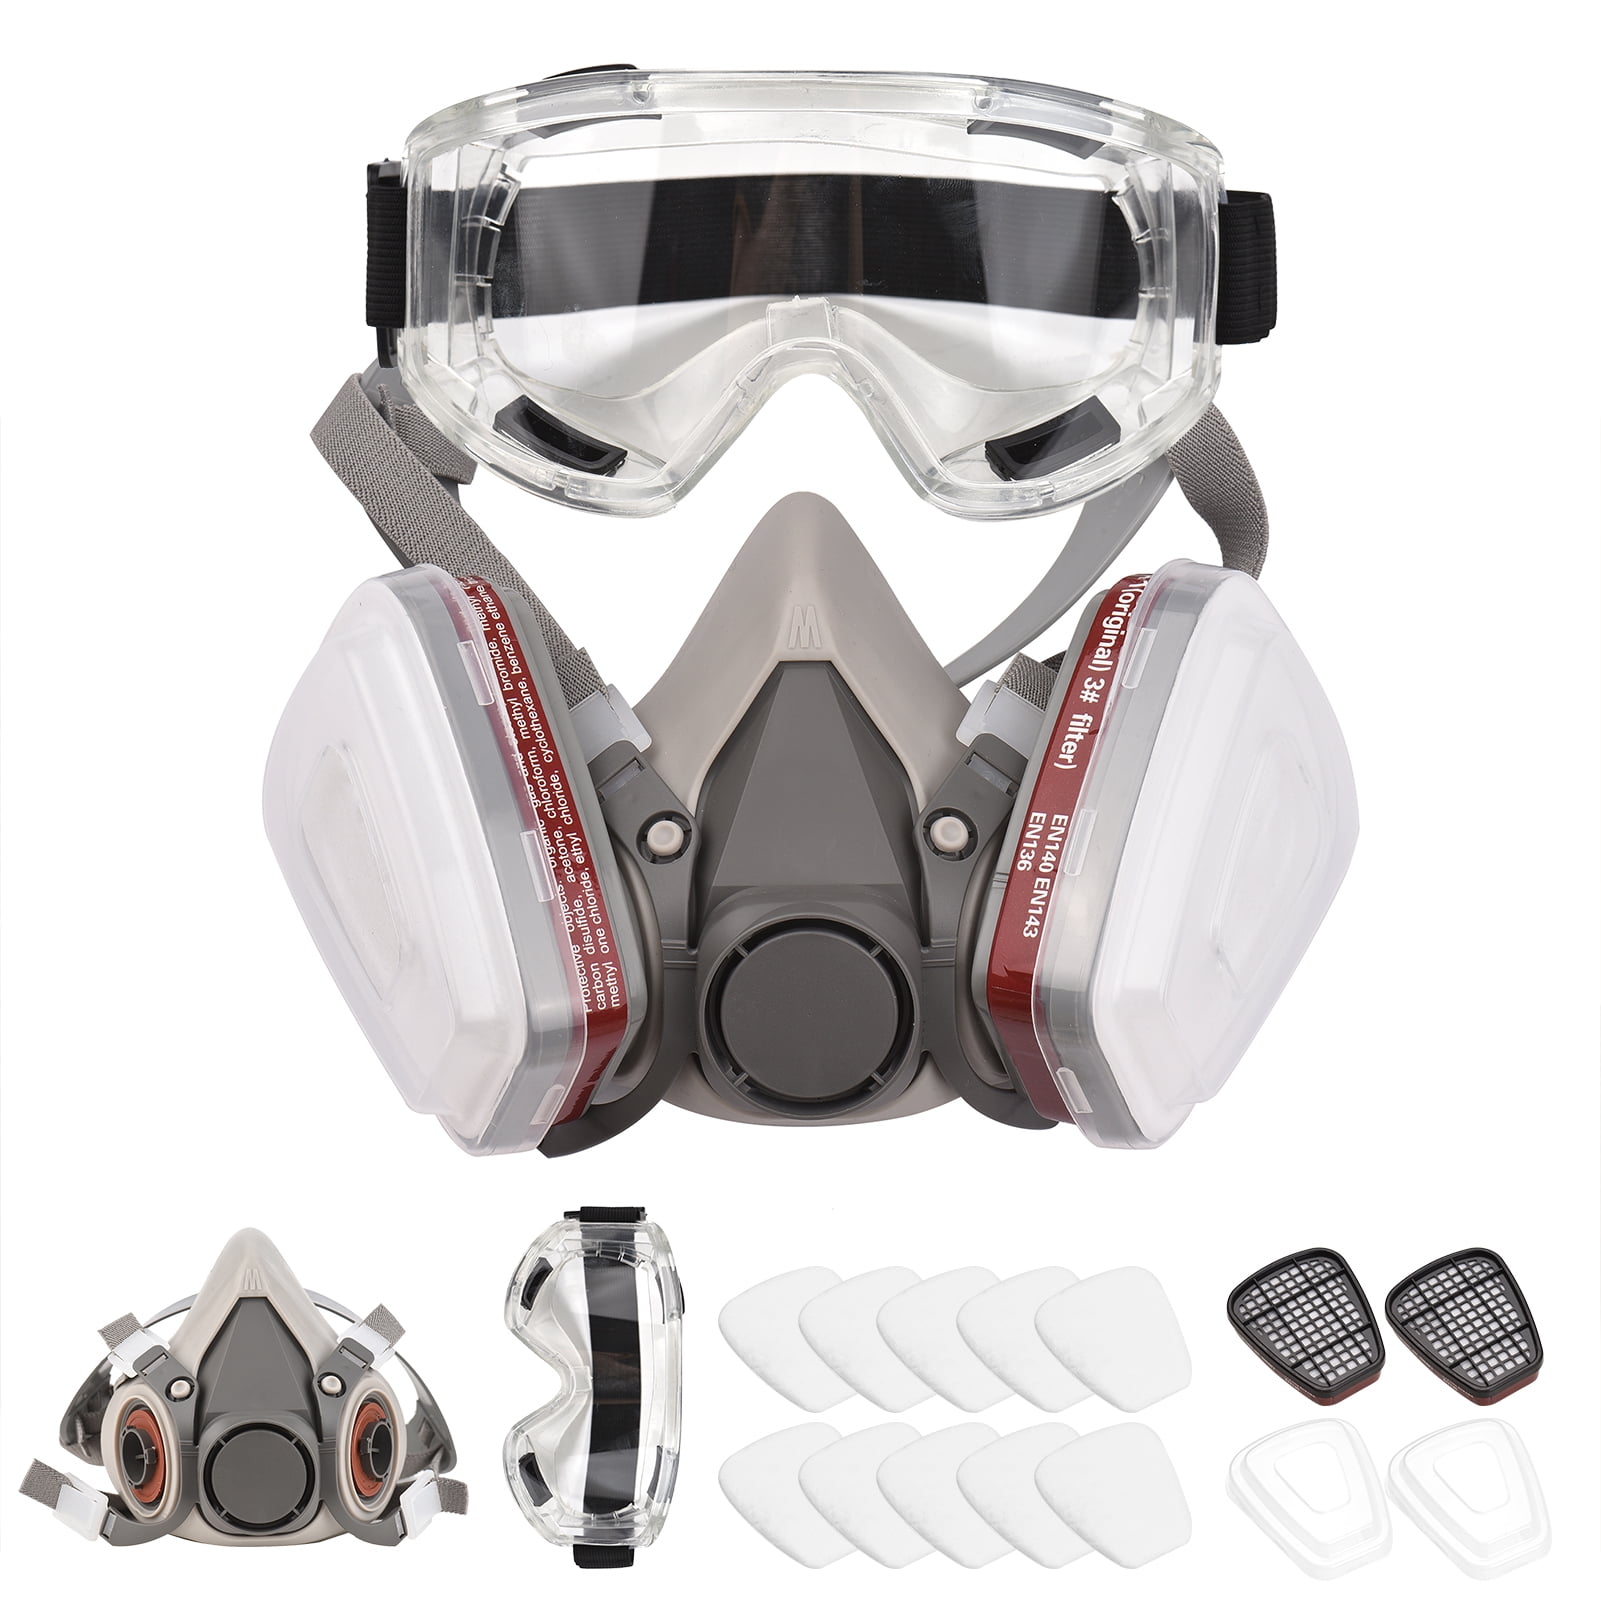 KKmoon Reusable Half Facepiece 6200 Gas Breathing Protection Respirators  with Safety Goggles for Painting Organic Vapor Welding Polishing  Woodworking and Other Work Protection - Walmart.com